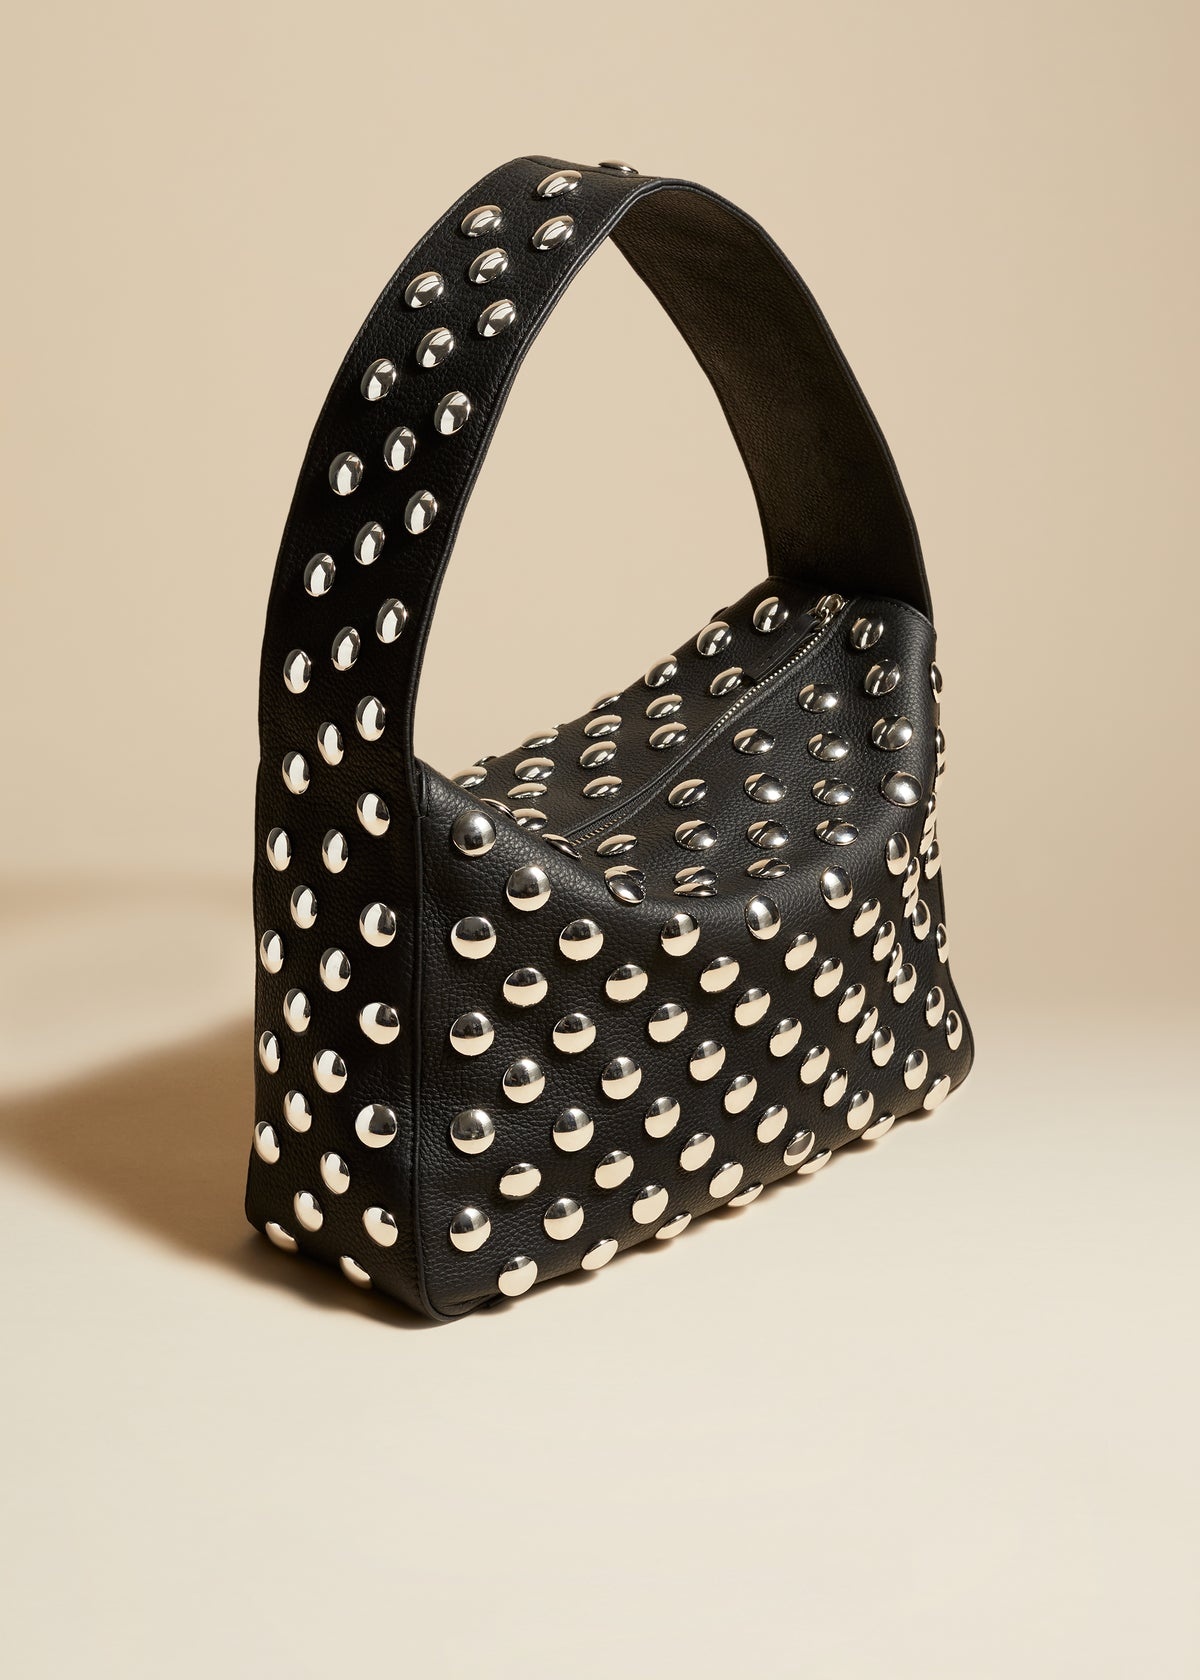 The Elena Bag in Black Leather with Studs - 2